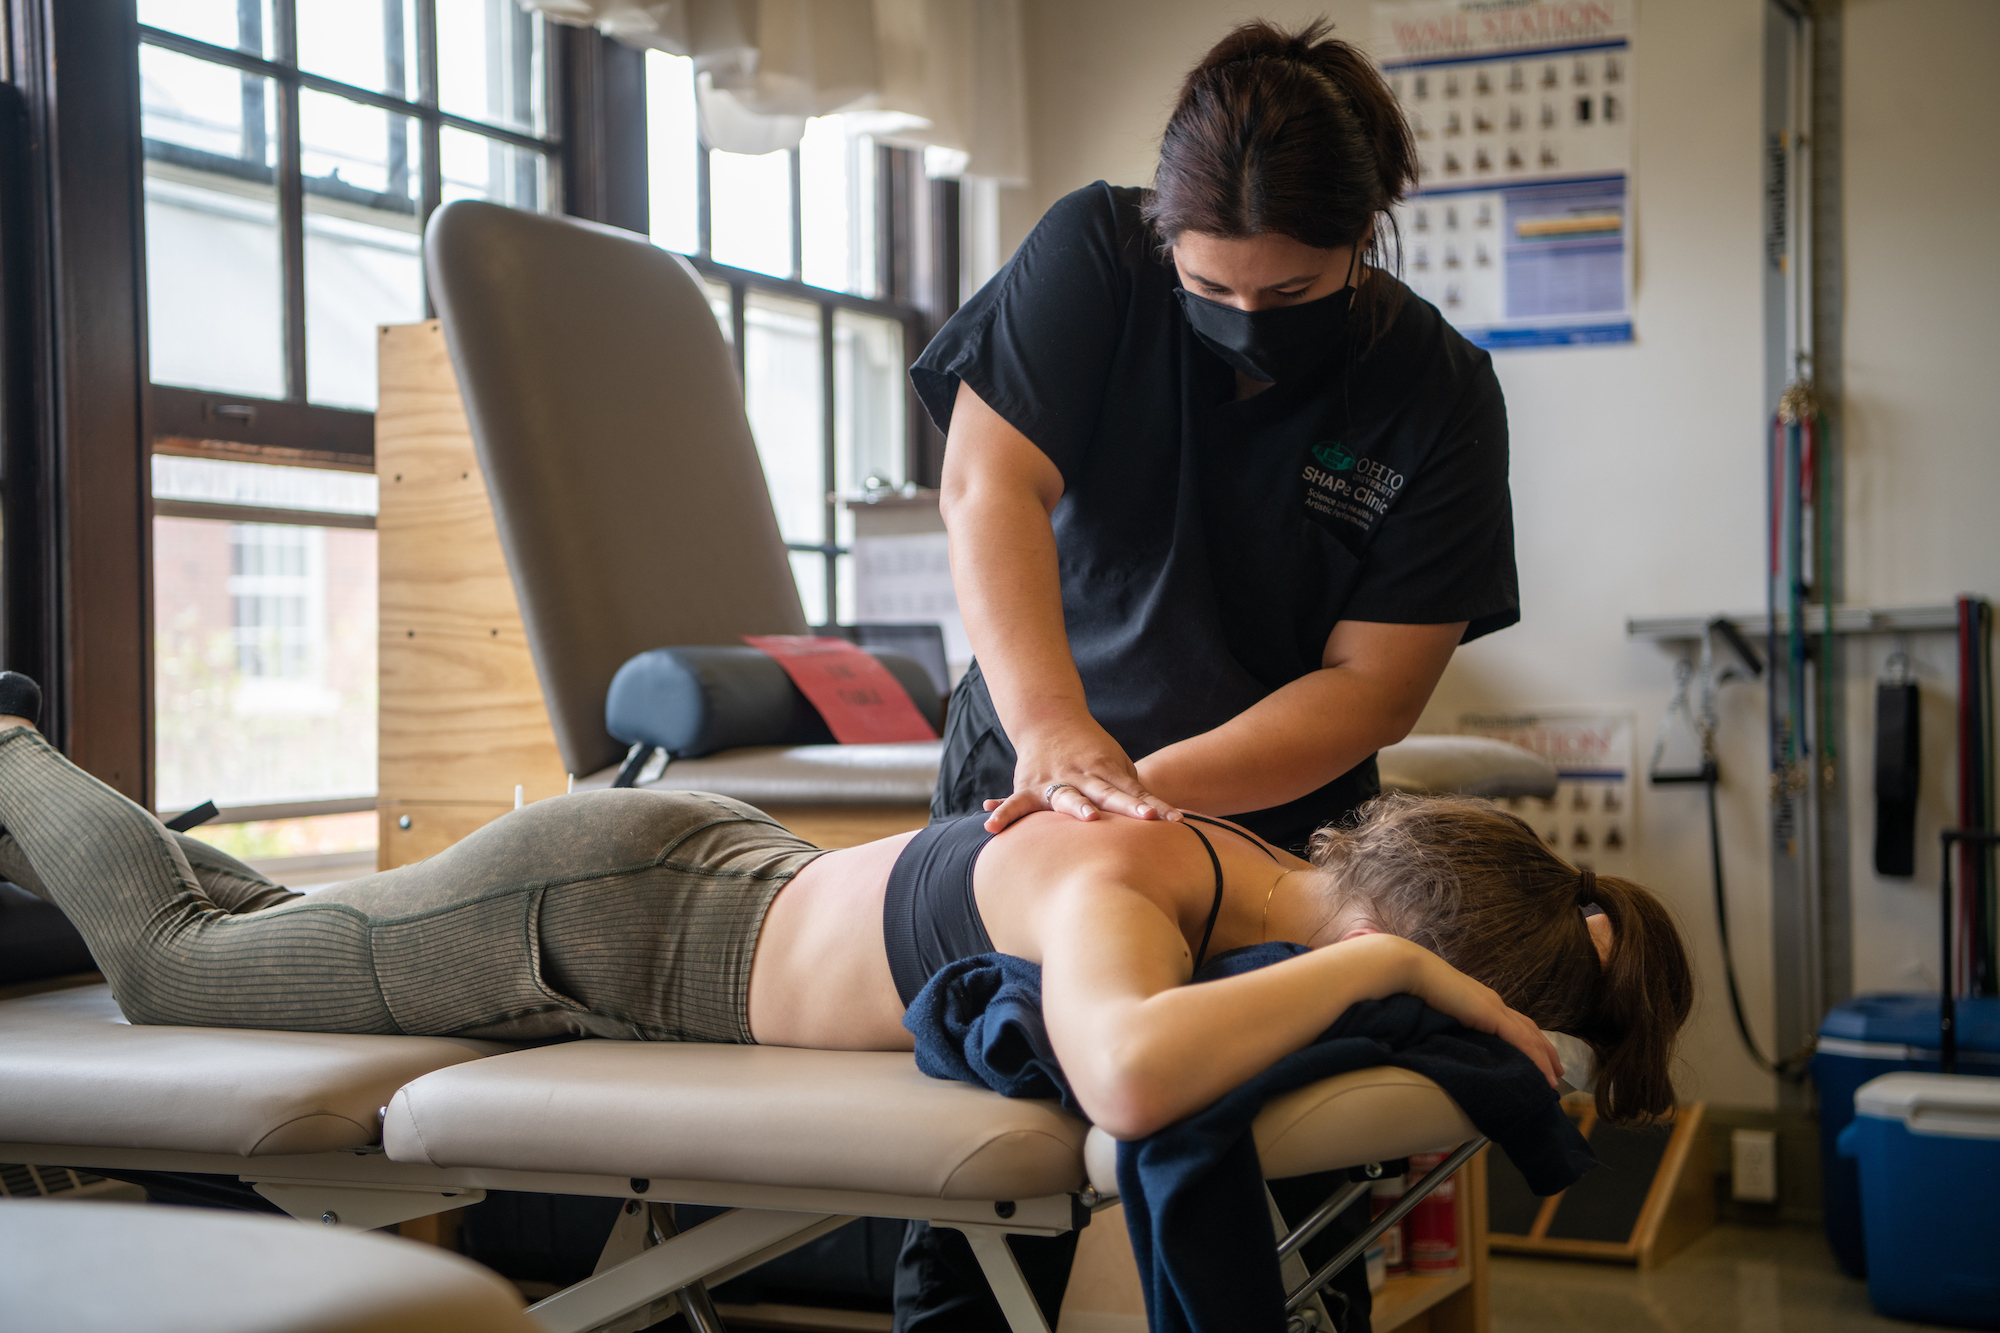 A SHAPe Clinic athletic trainer works on a student's back as they lay down